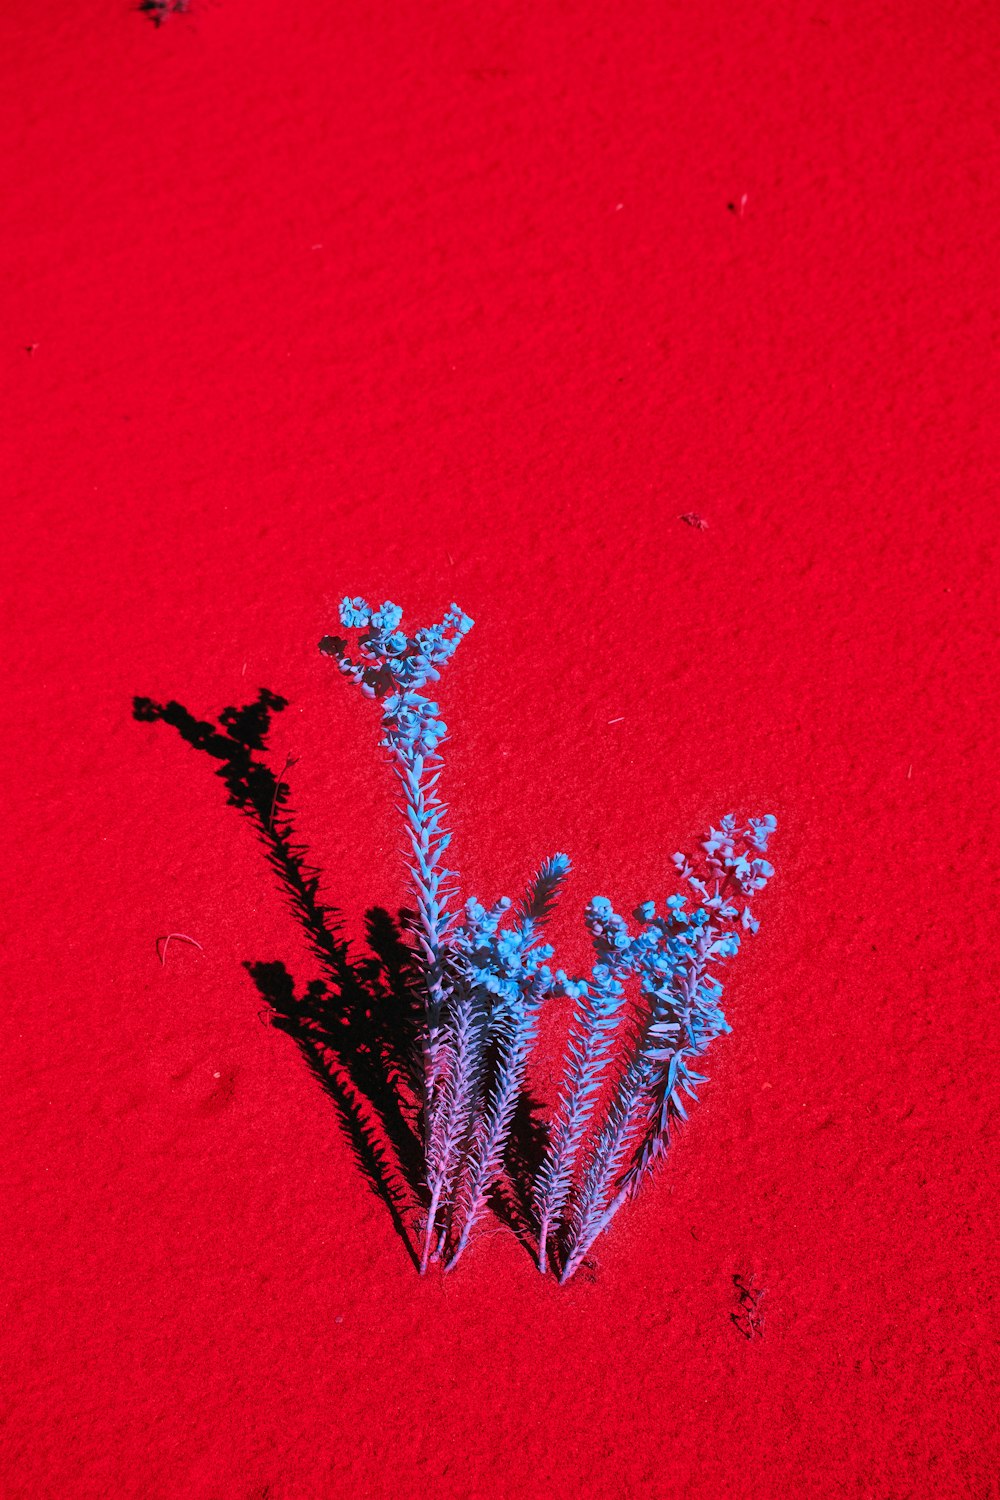 a plant is casting a shadow on a red surface